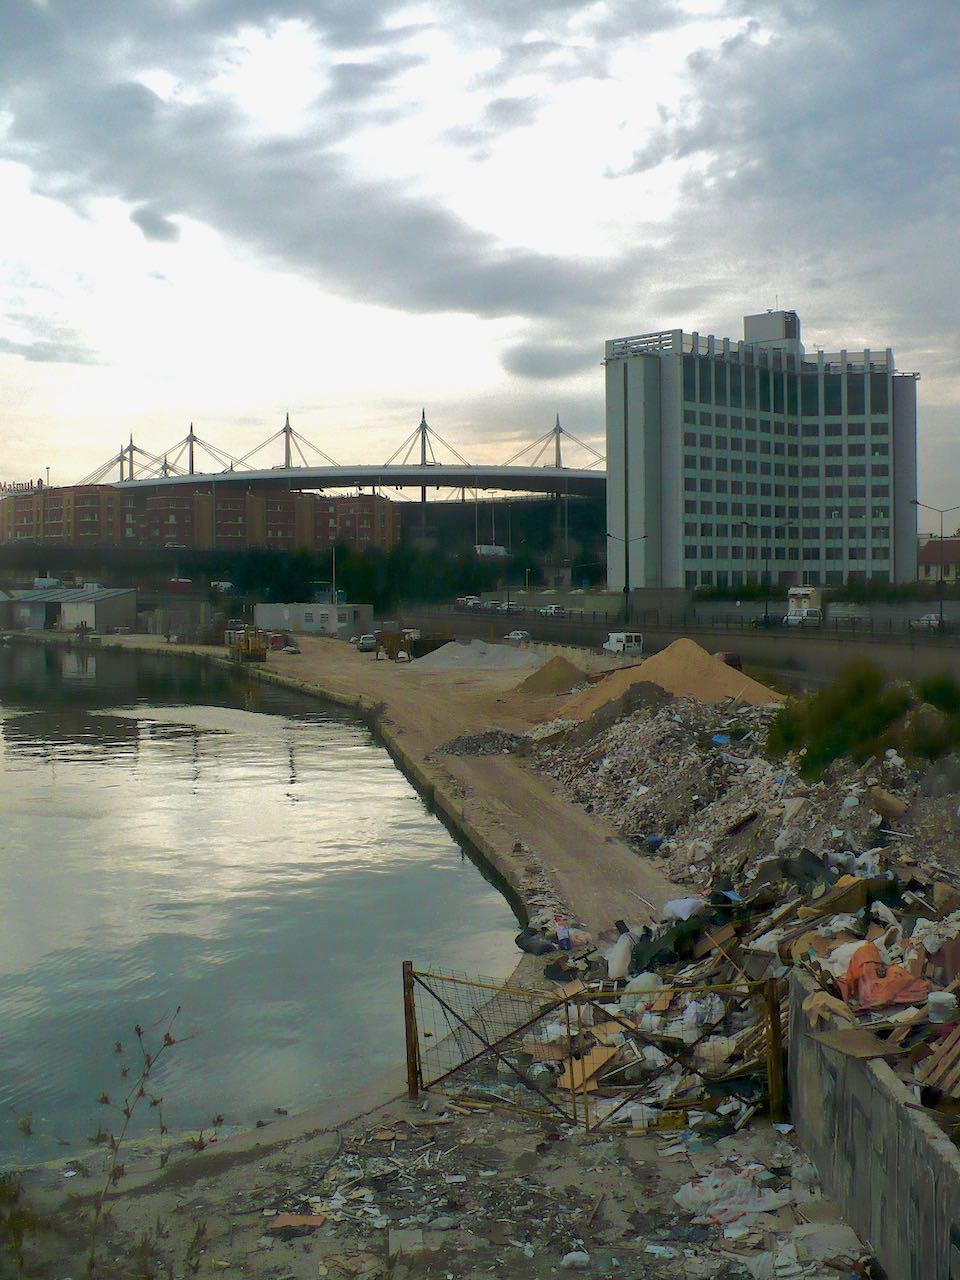 Figure 26: The Stade de France and the abandoned zones nearby, seen from Porte de Saint-Denis.